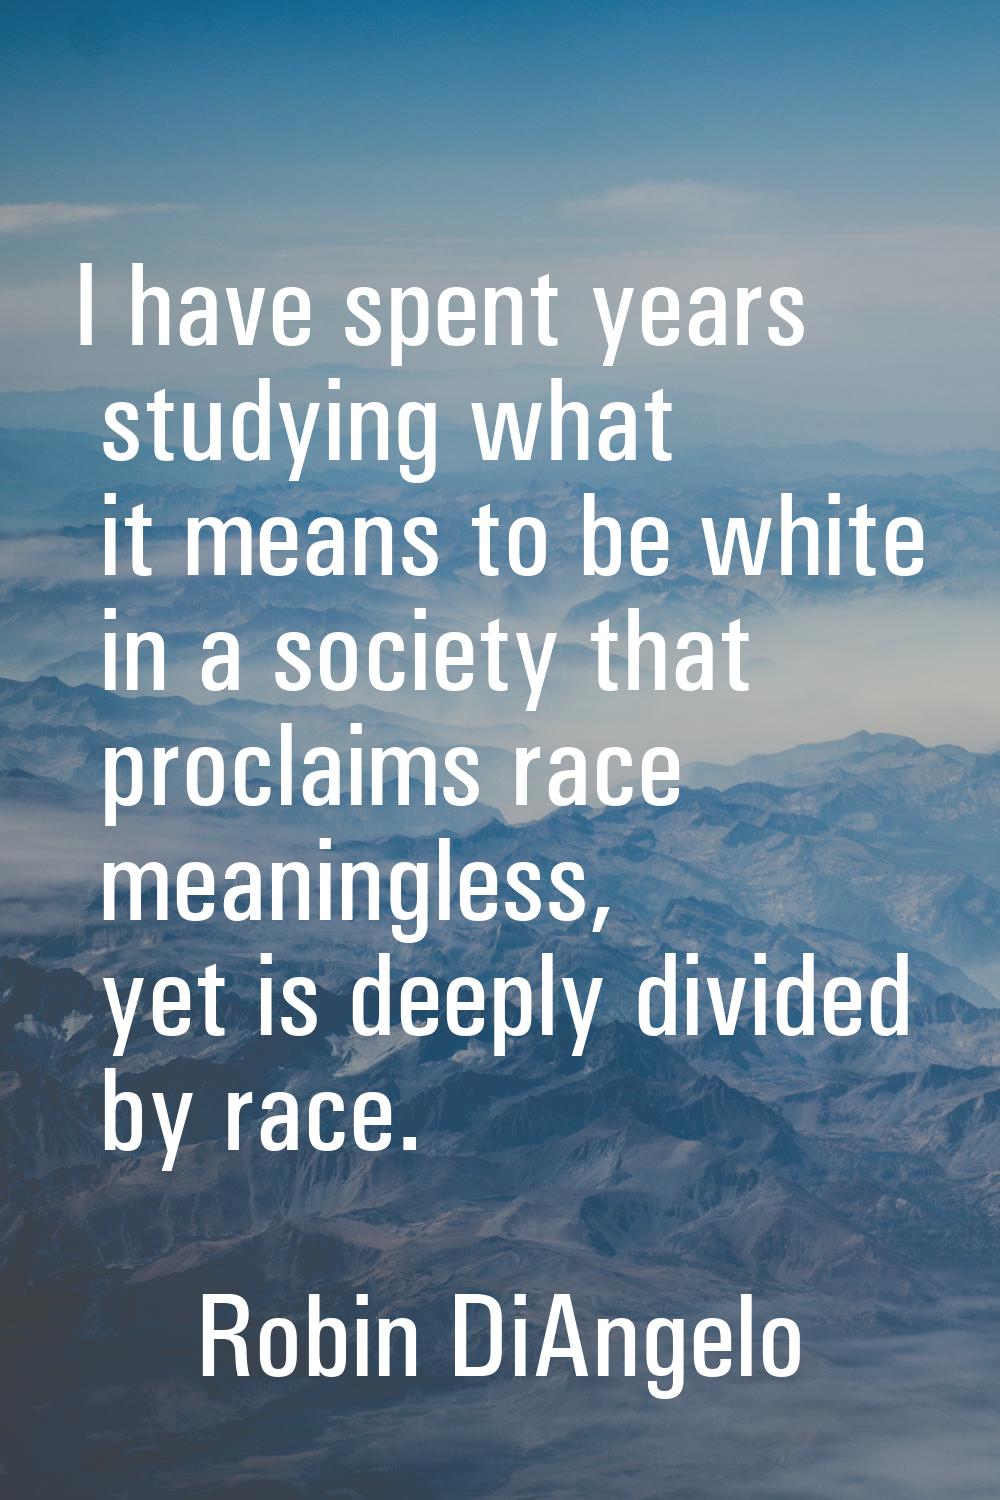 I have spent years studying what it means to be white in a society that proclaims race meaningless,